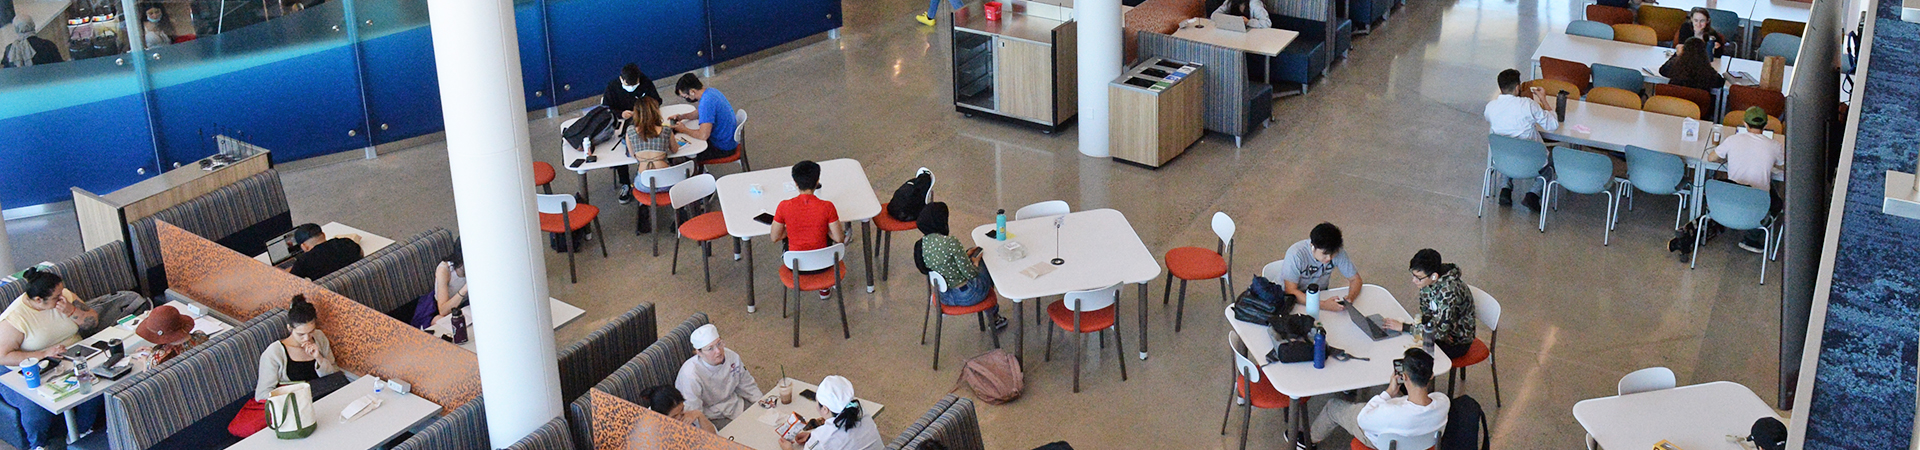 Students in the College Center dining area viewed from 2nd floor